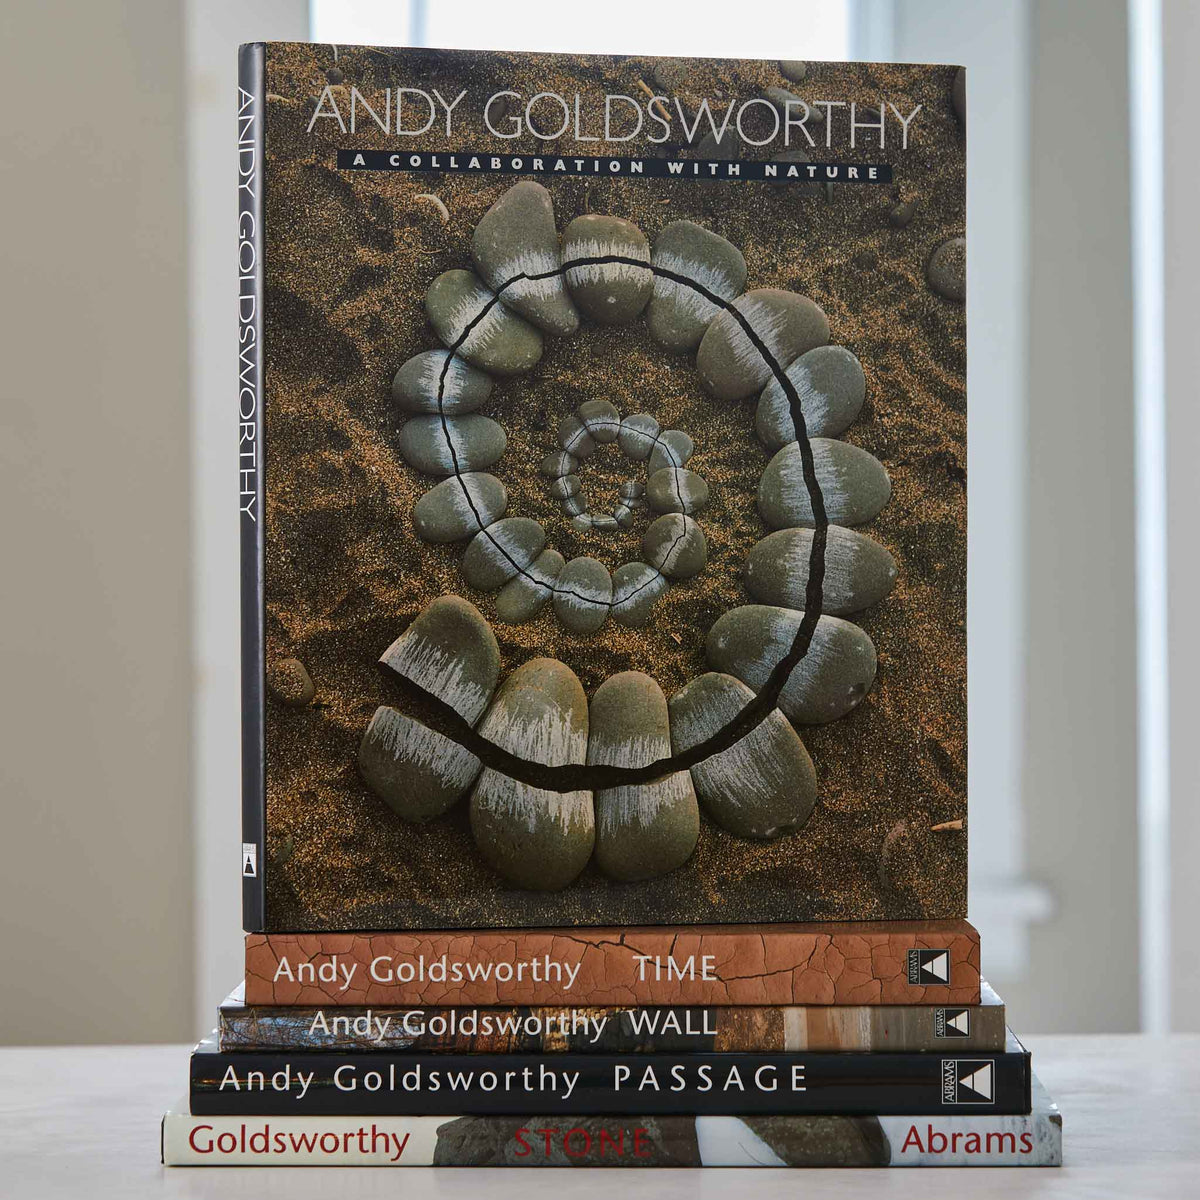 ANDY GOLDSWORTHY, A COLLABORATION WITH NATURE